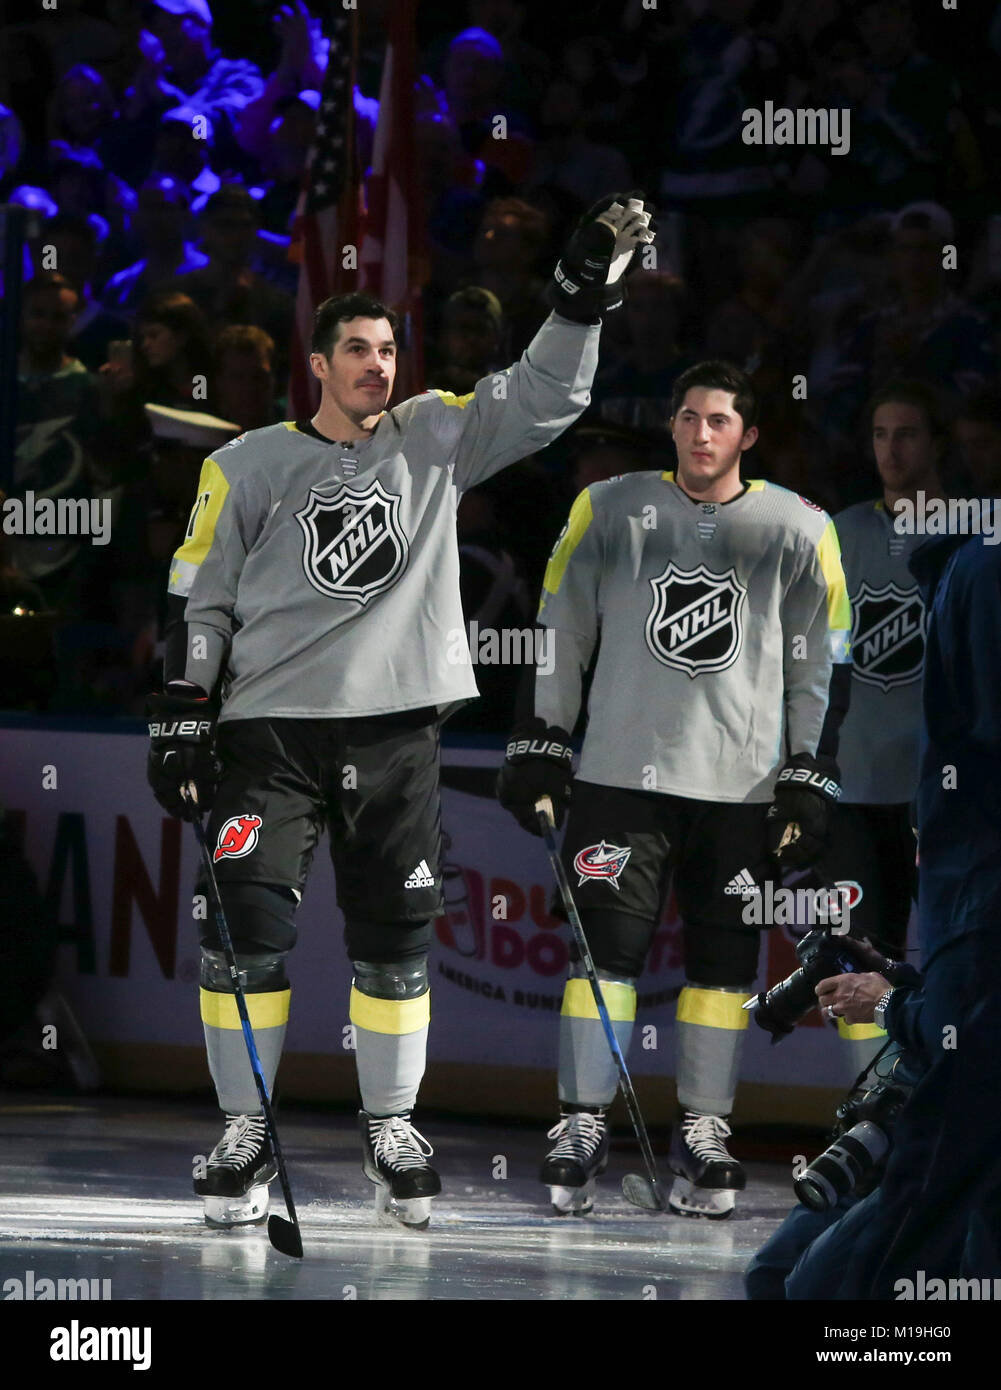 Brian Boyle will attend All-Star Game for the Devils in lieu of